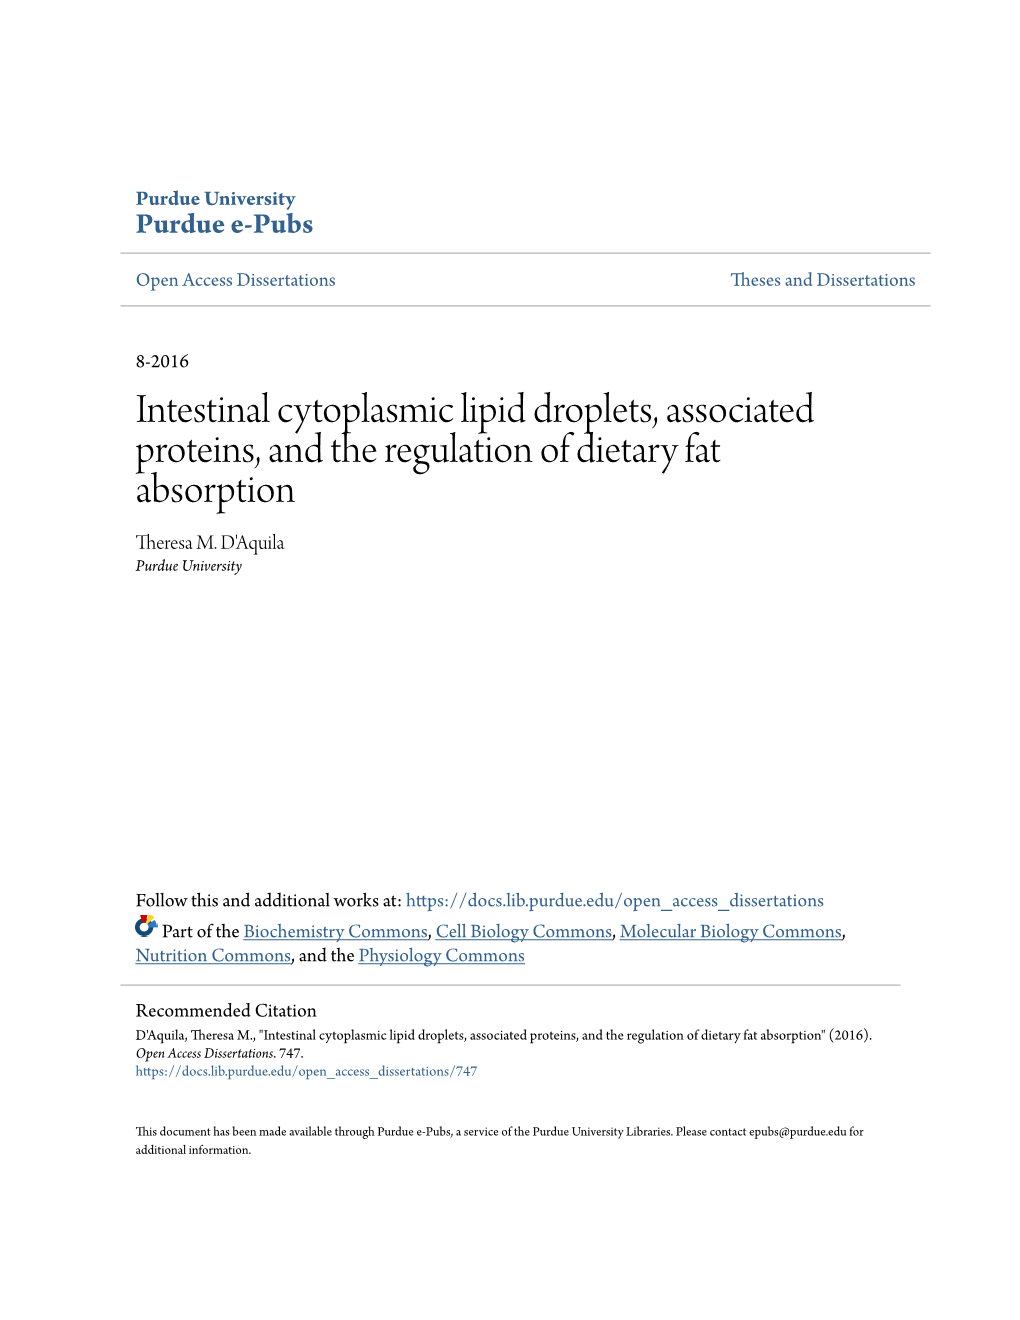 Intestinal Cytoplasmic Lipid Droplets, Associated Proteins, and the Regulation of Dietary Fat Absorption Theresa M